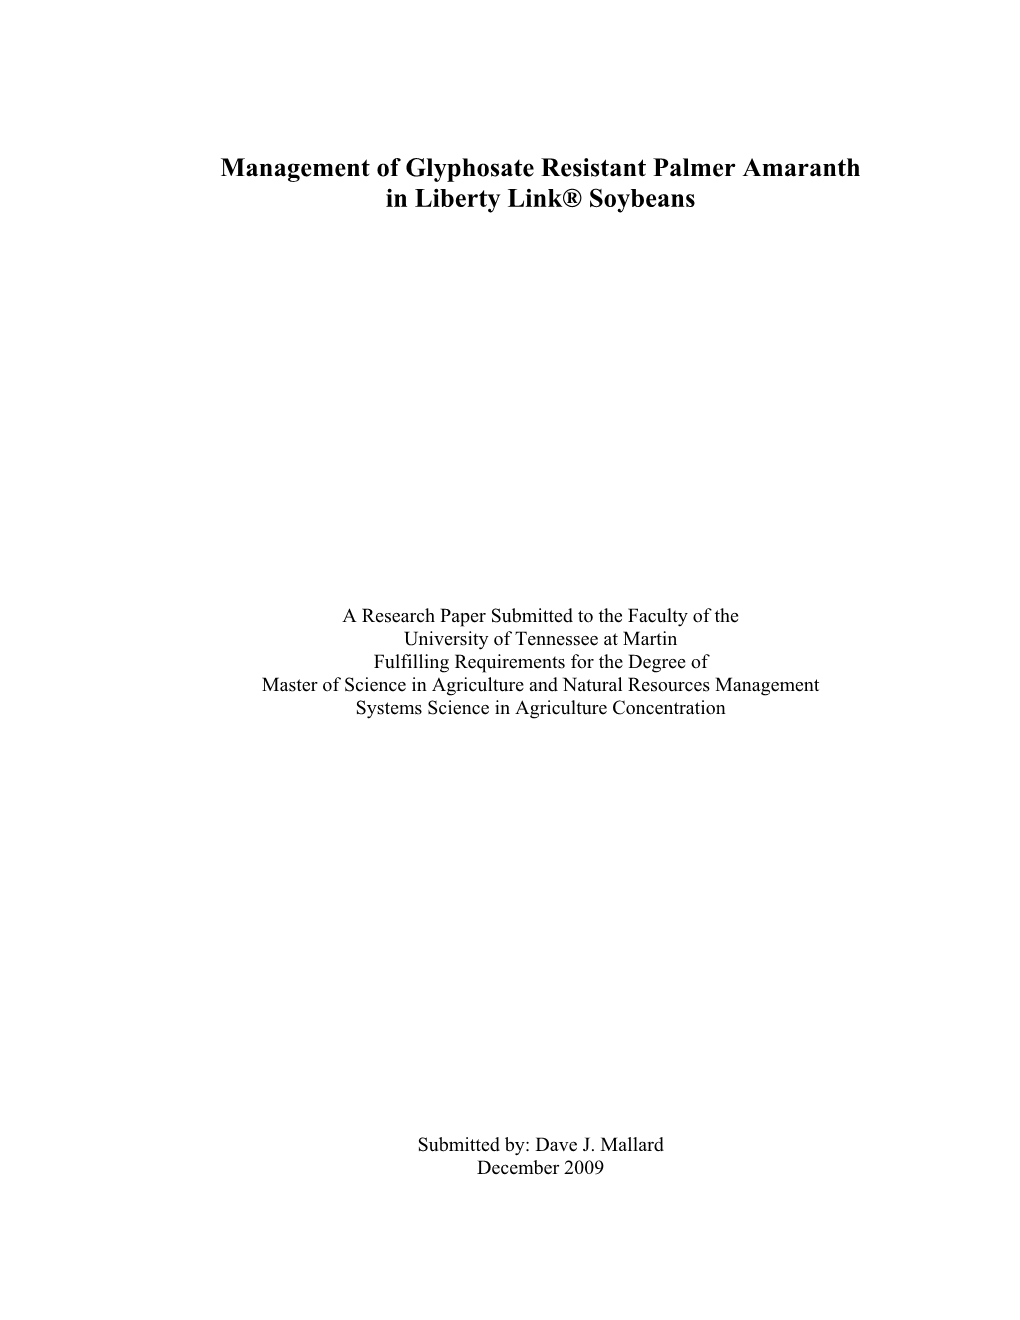 Management of Glyphosate Resistant Palmer Amaranth in Liberty Link® Soybeans